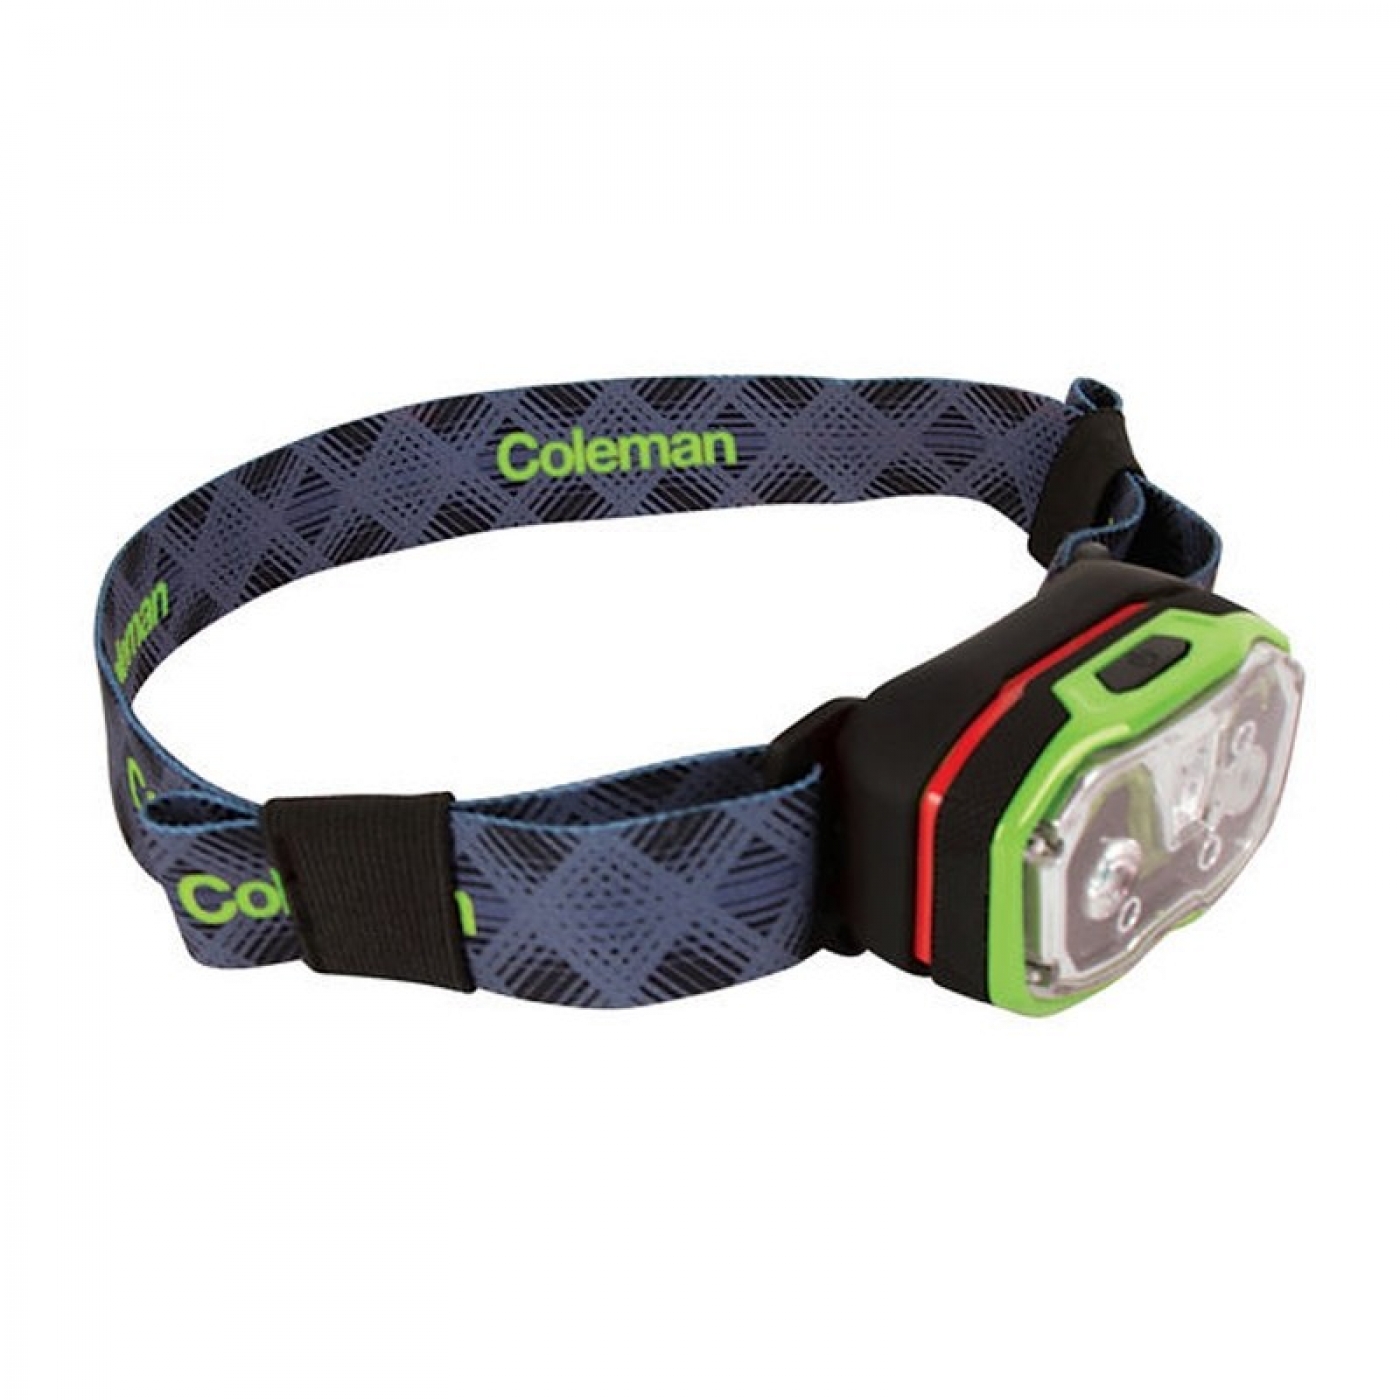 BATTERY LOCK CXS PLUS 300 LITHIUM-ION RECHARGE HEAD TORCH